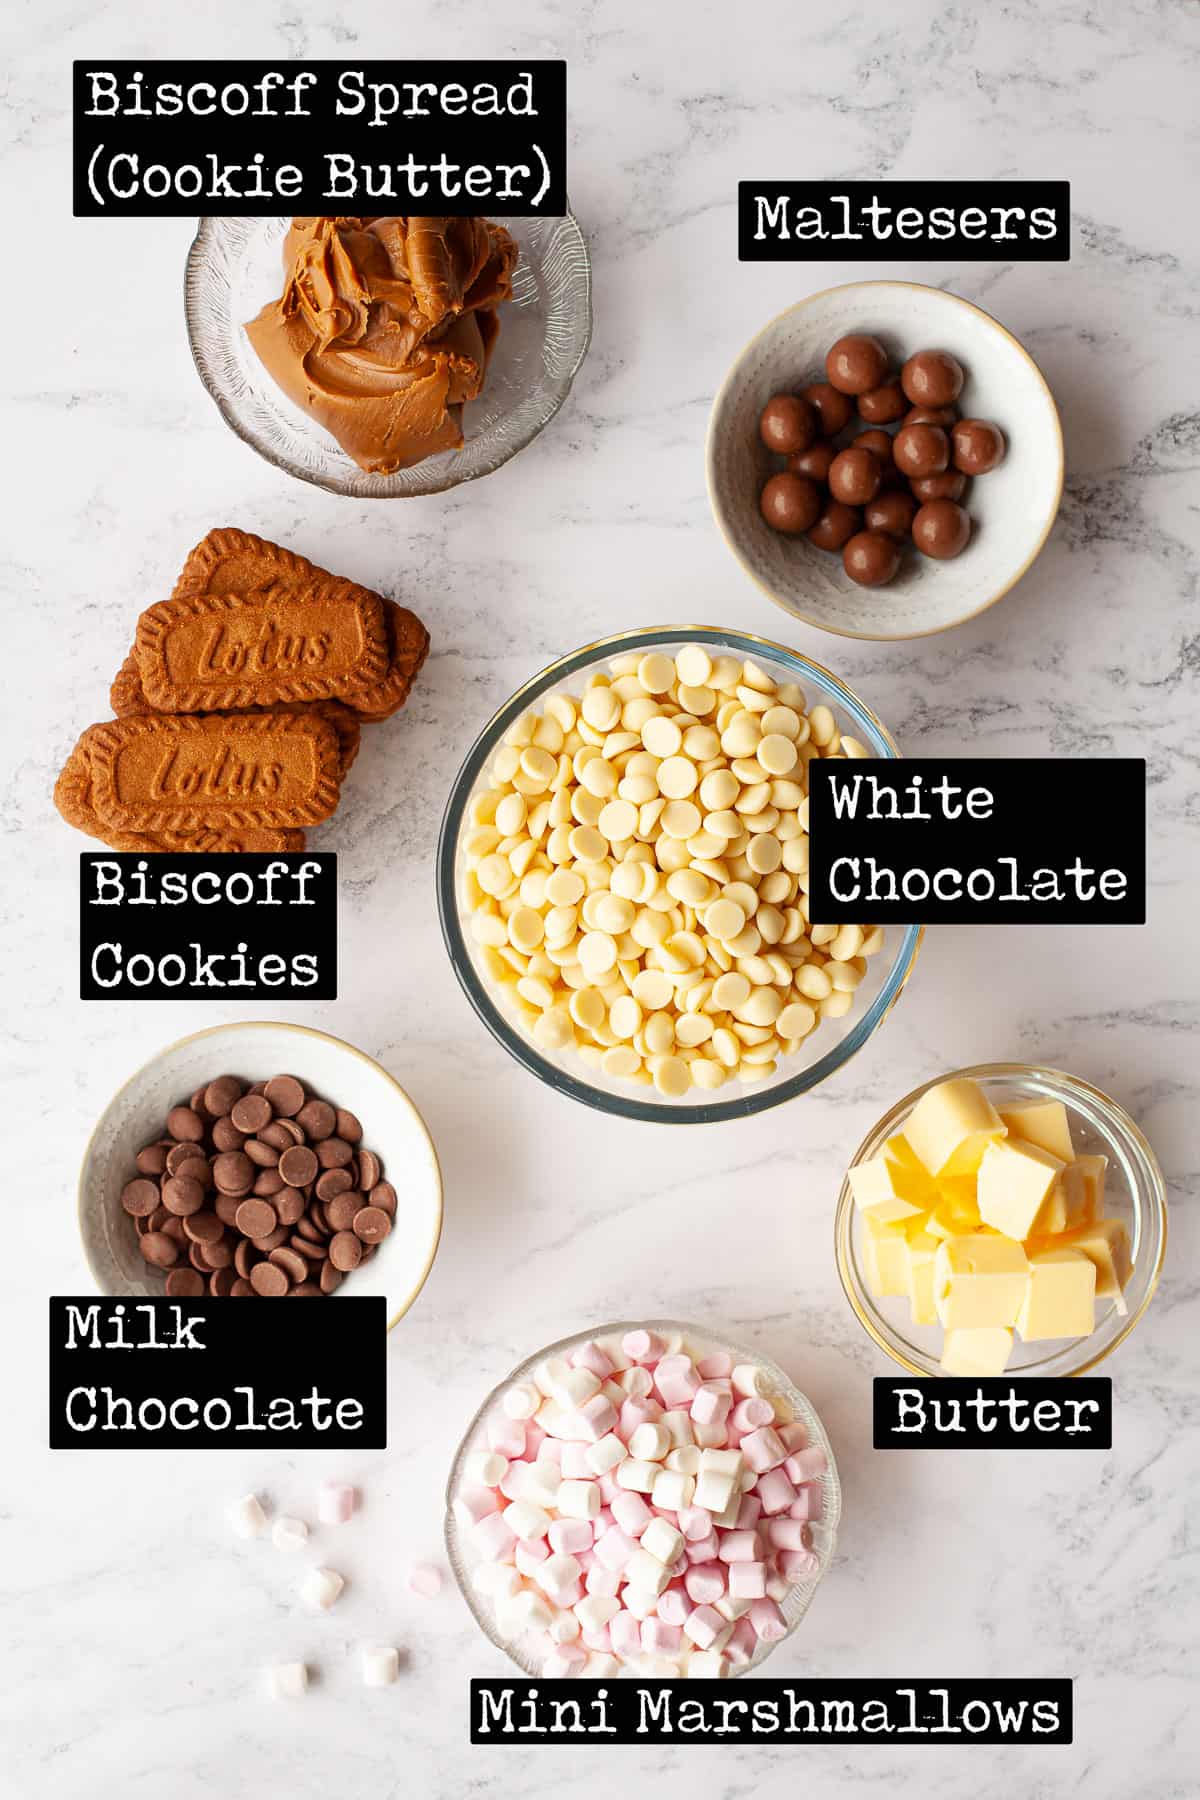 Ingredients with text overlay for a white chocolate and cookie butter bar recipe.